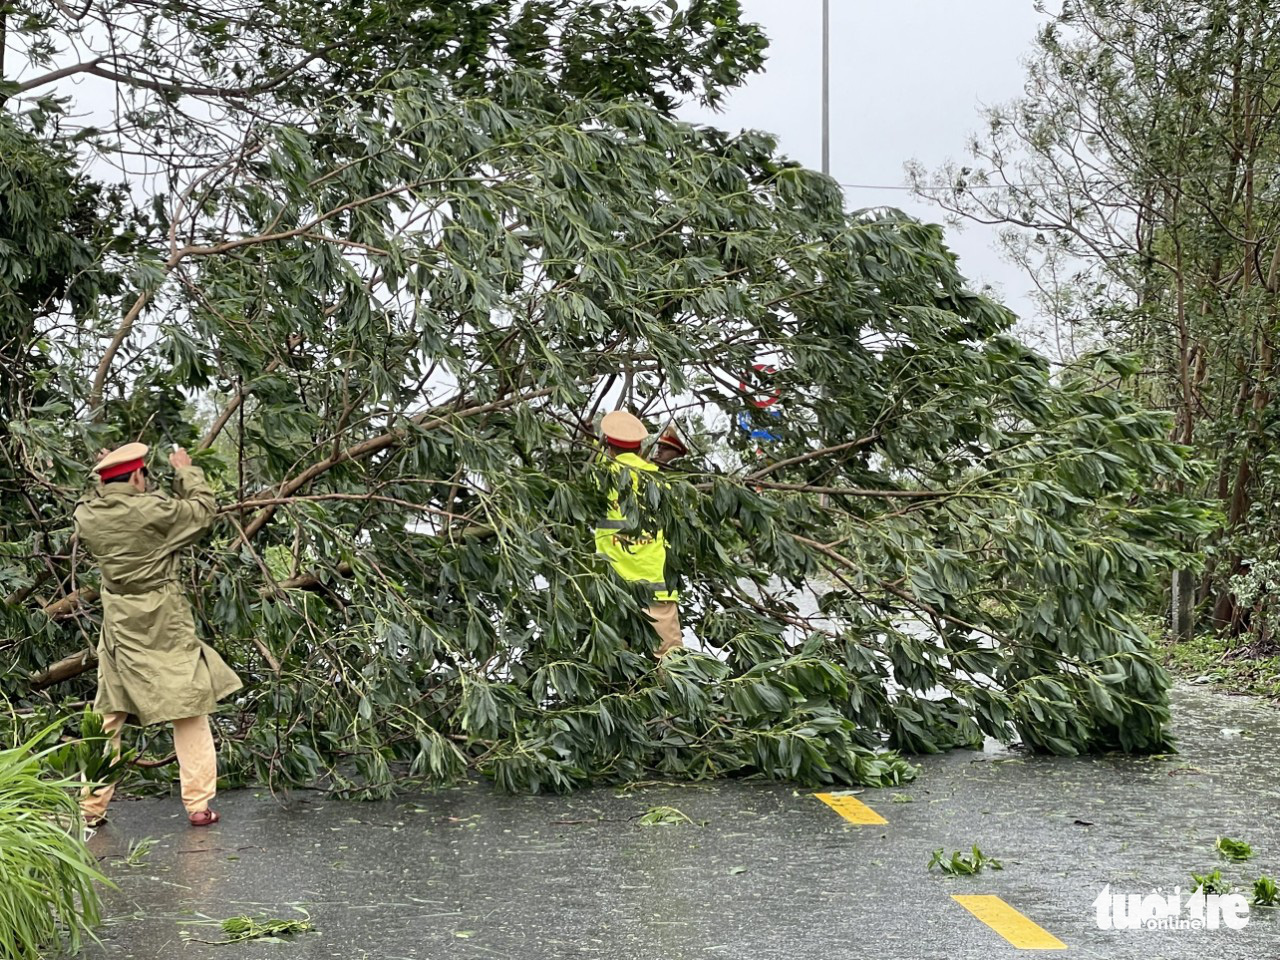 Officers remove an uprooted tree from a street in Da Nang City, Vietnam, September 28, 2022. Photo: Doan Cuong / Tuoi Tre